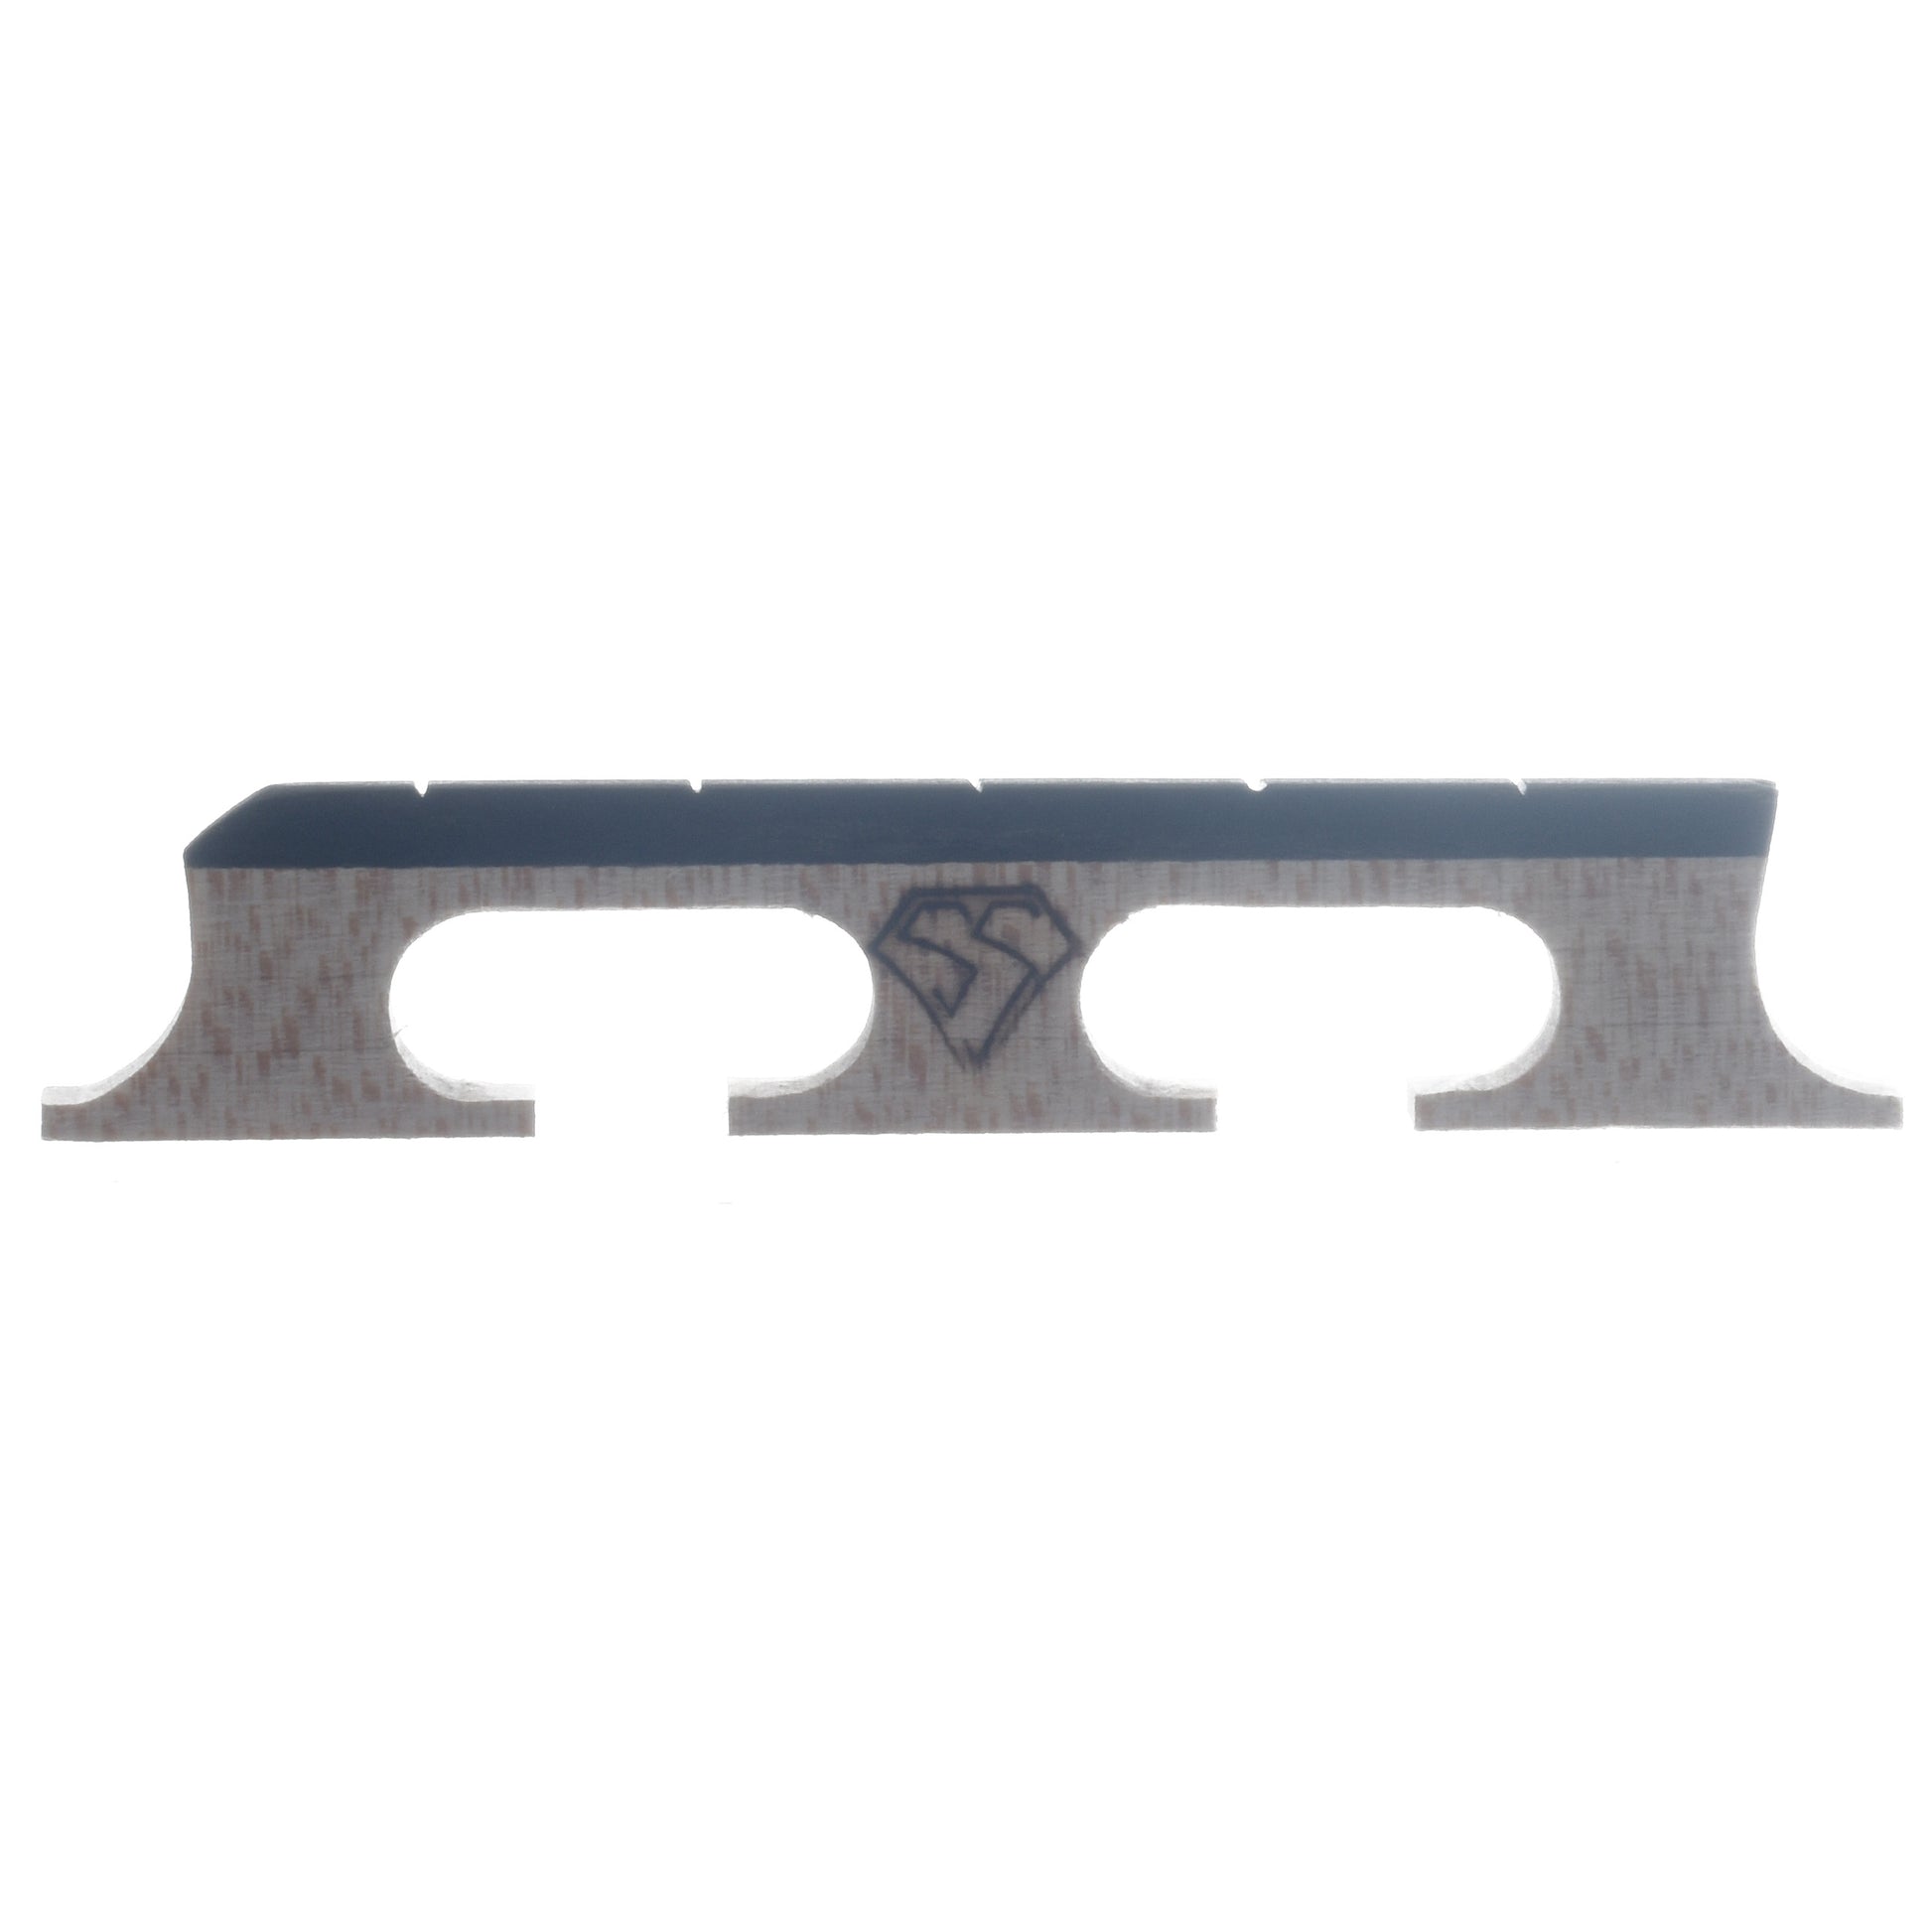 Image 2 of Snuffy Smith New Generation Banjo Bridge, 9/16" High with Crowe Spacing - SKU# SSNG-9/16-C : Product Type Accessories & Parts : Elderly Instruments